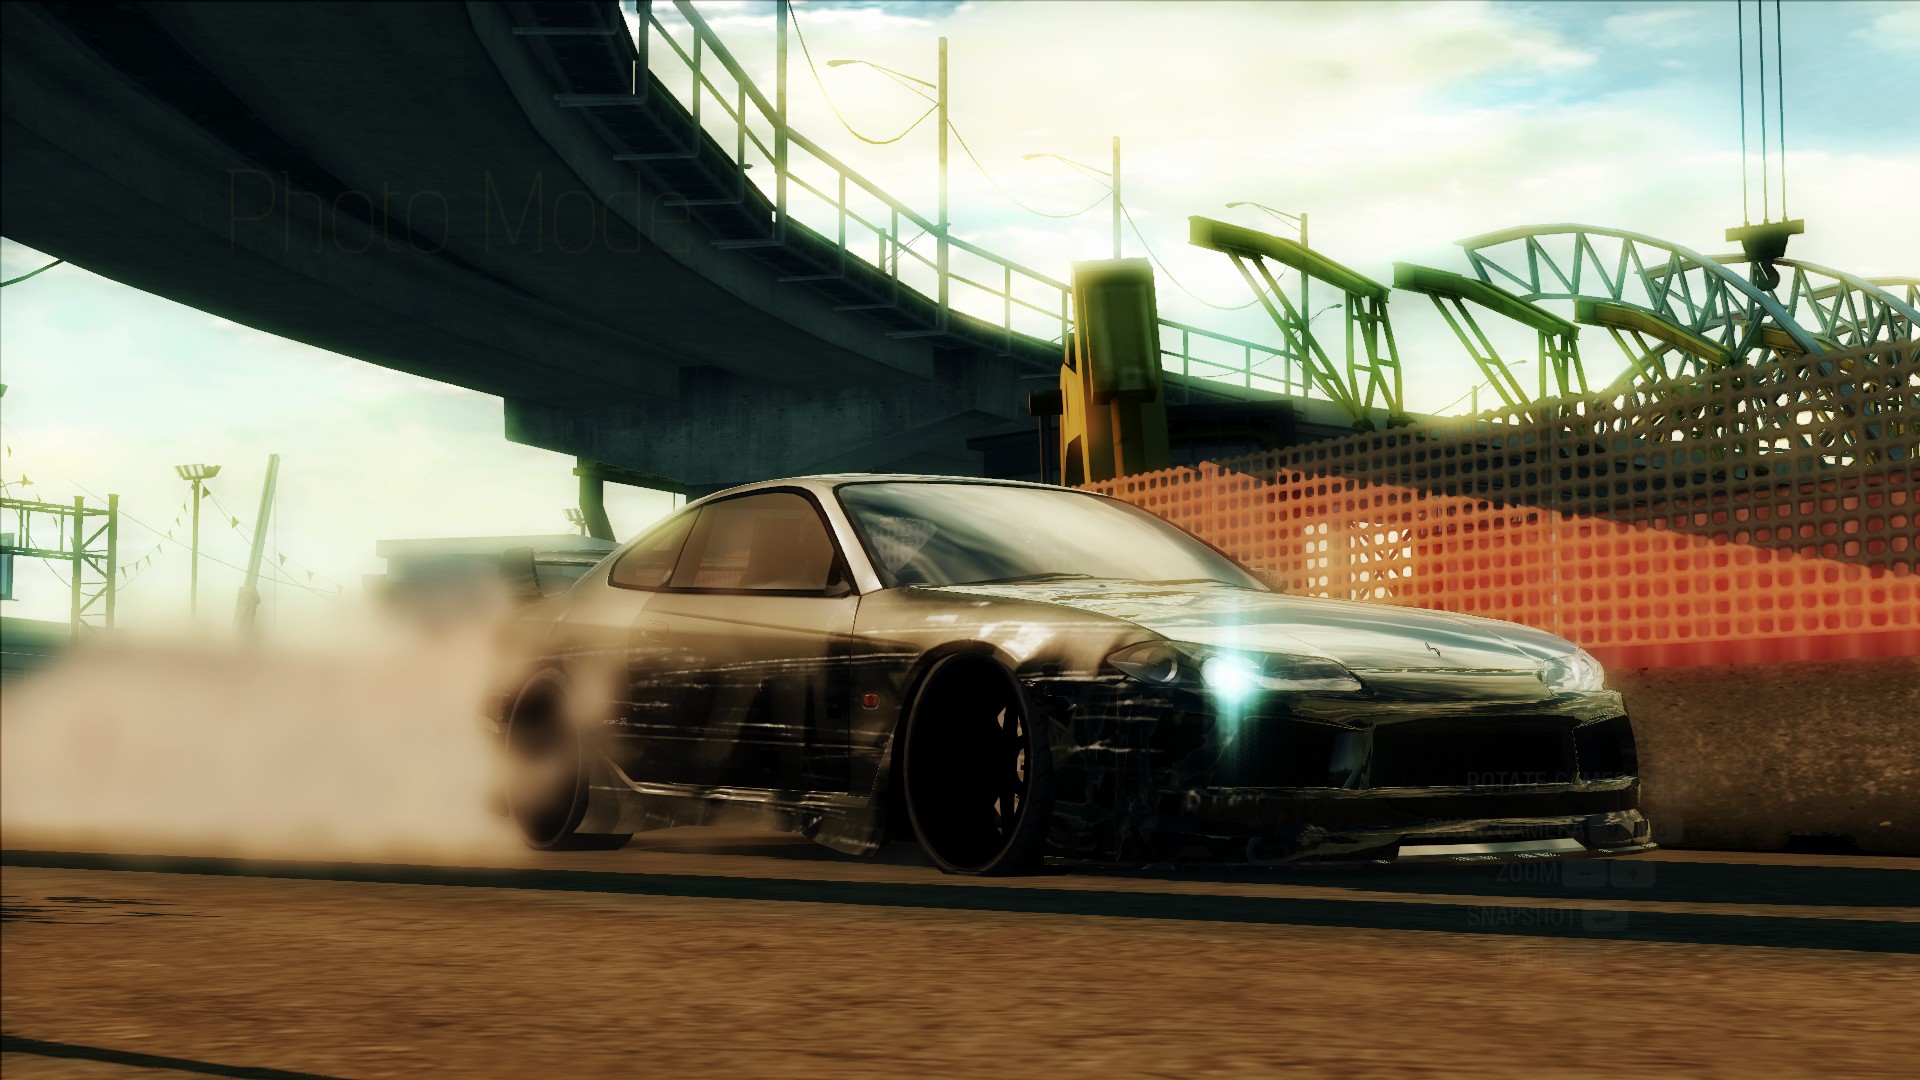 Need for Speed Undercover Nissan Silvia by ErsinYaman